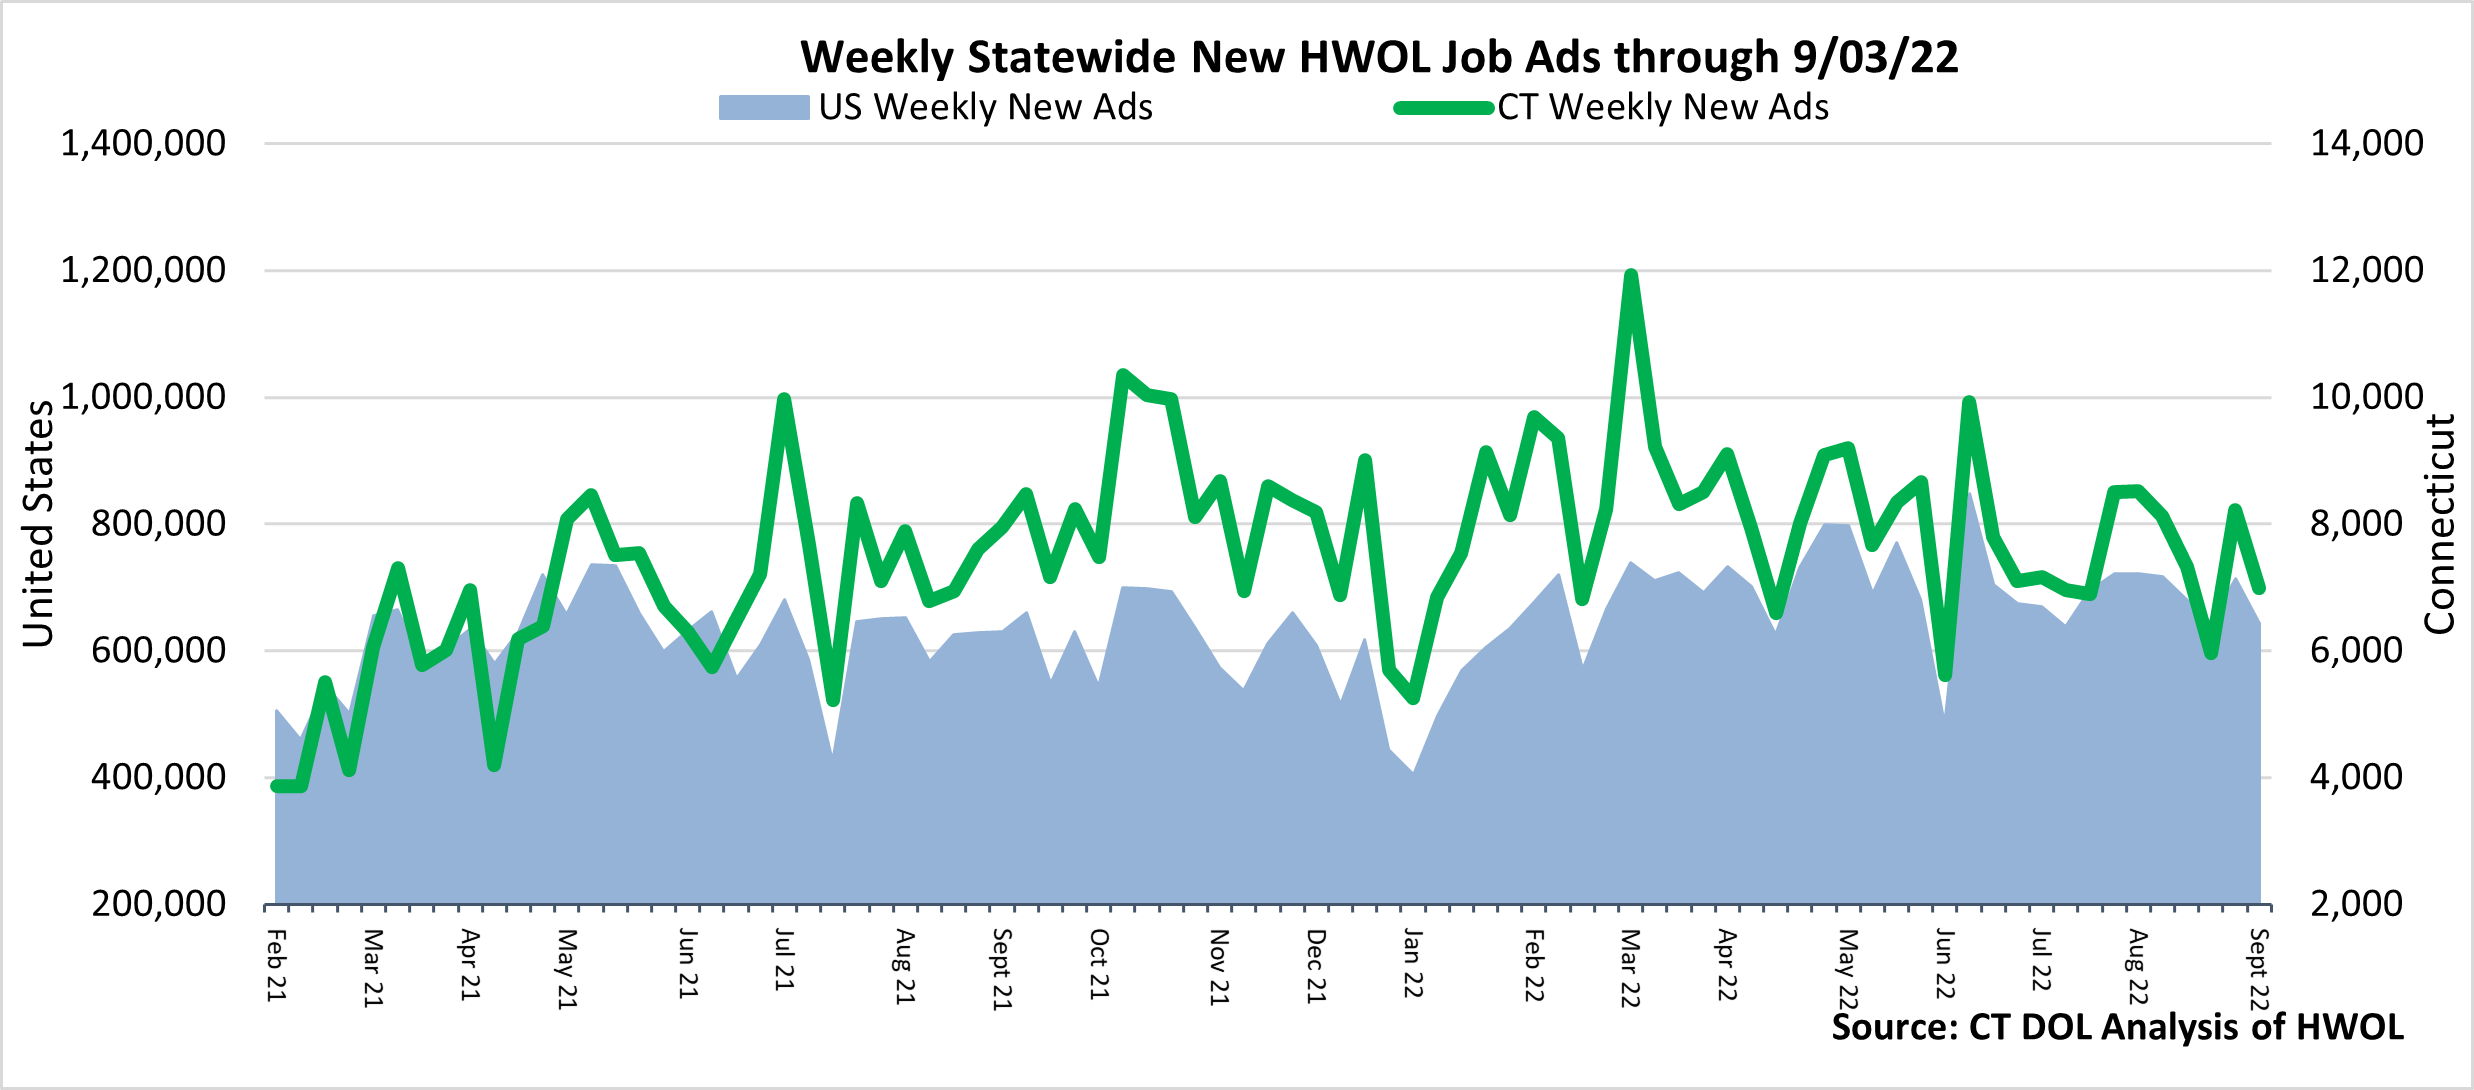 Connecticut Weekly Statewide New HWOL Job Ads through 09/03/22